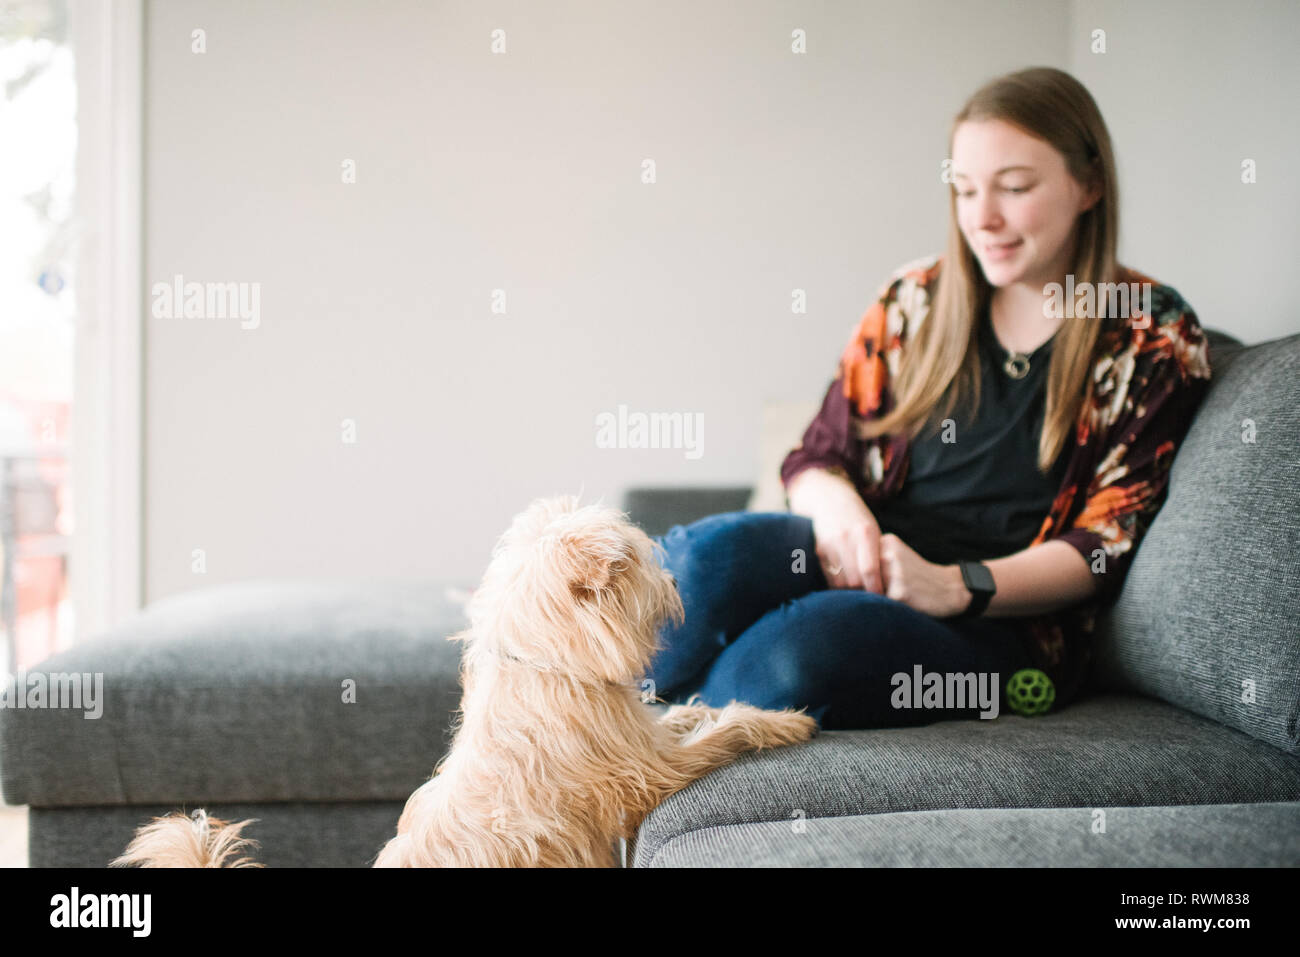 Woman watching dog from sofa Stock Photo